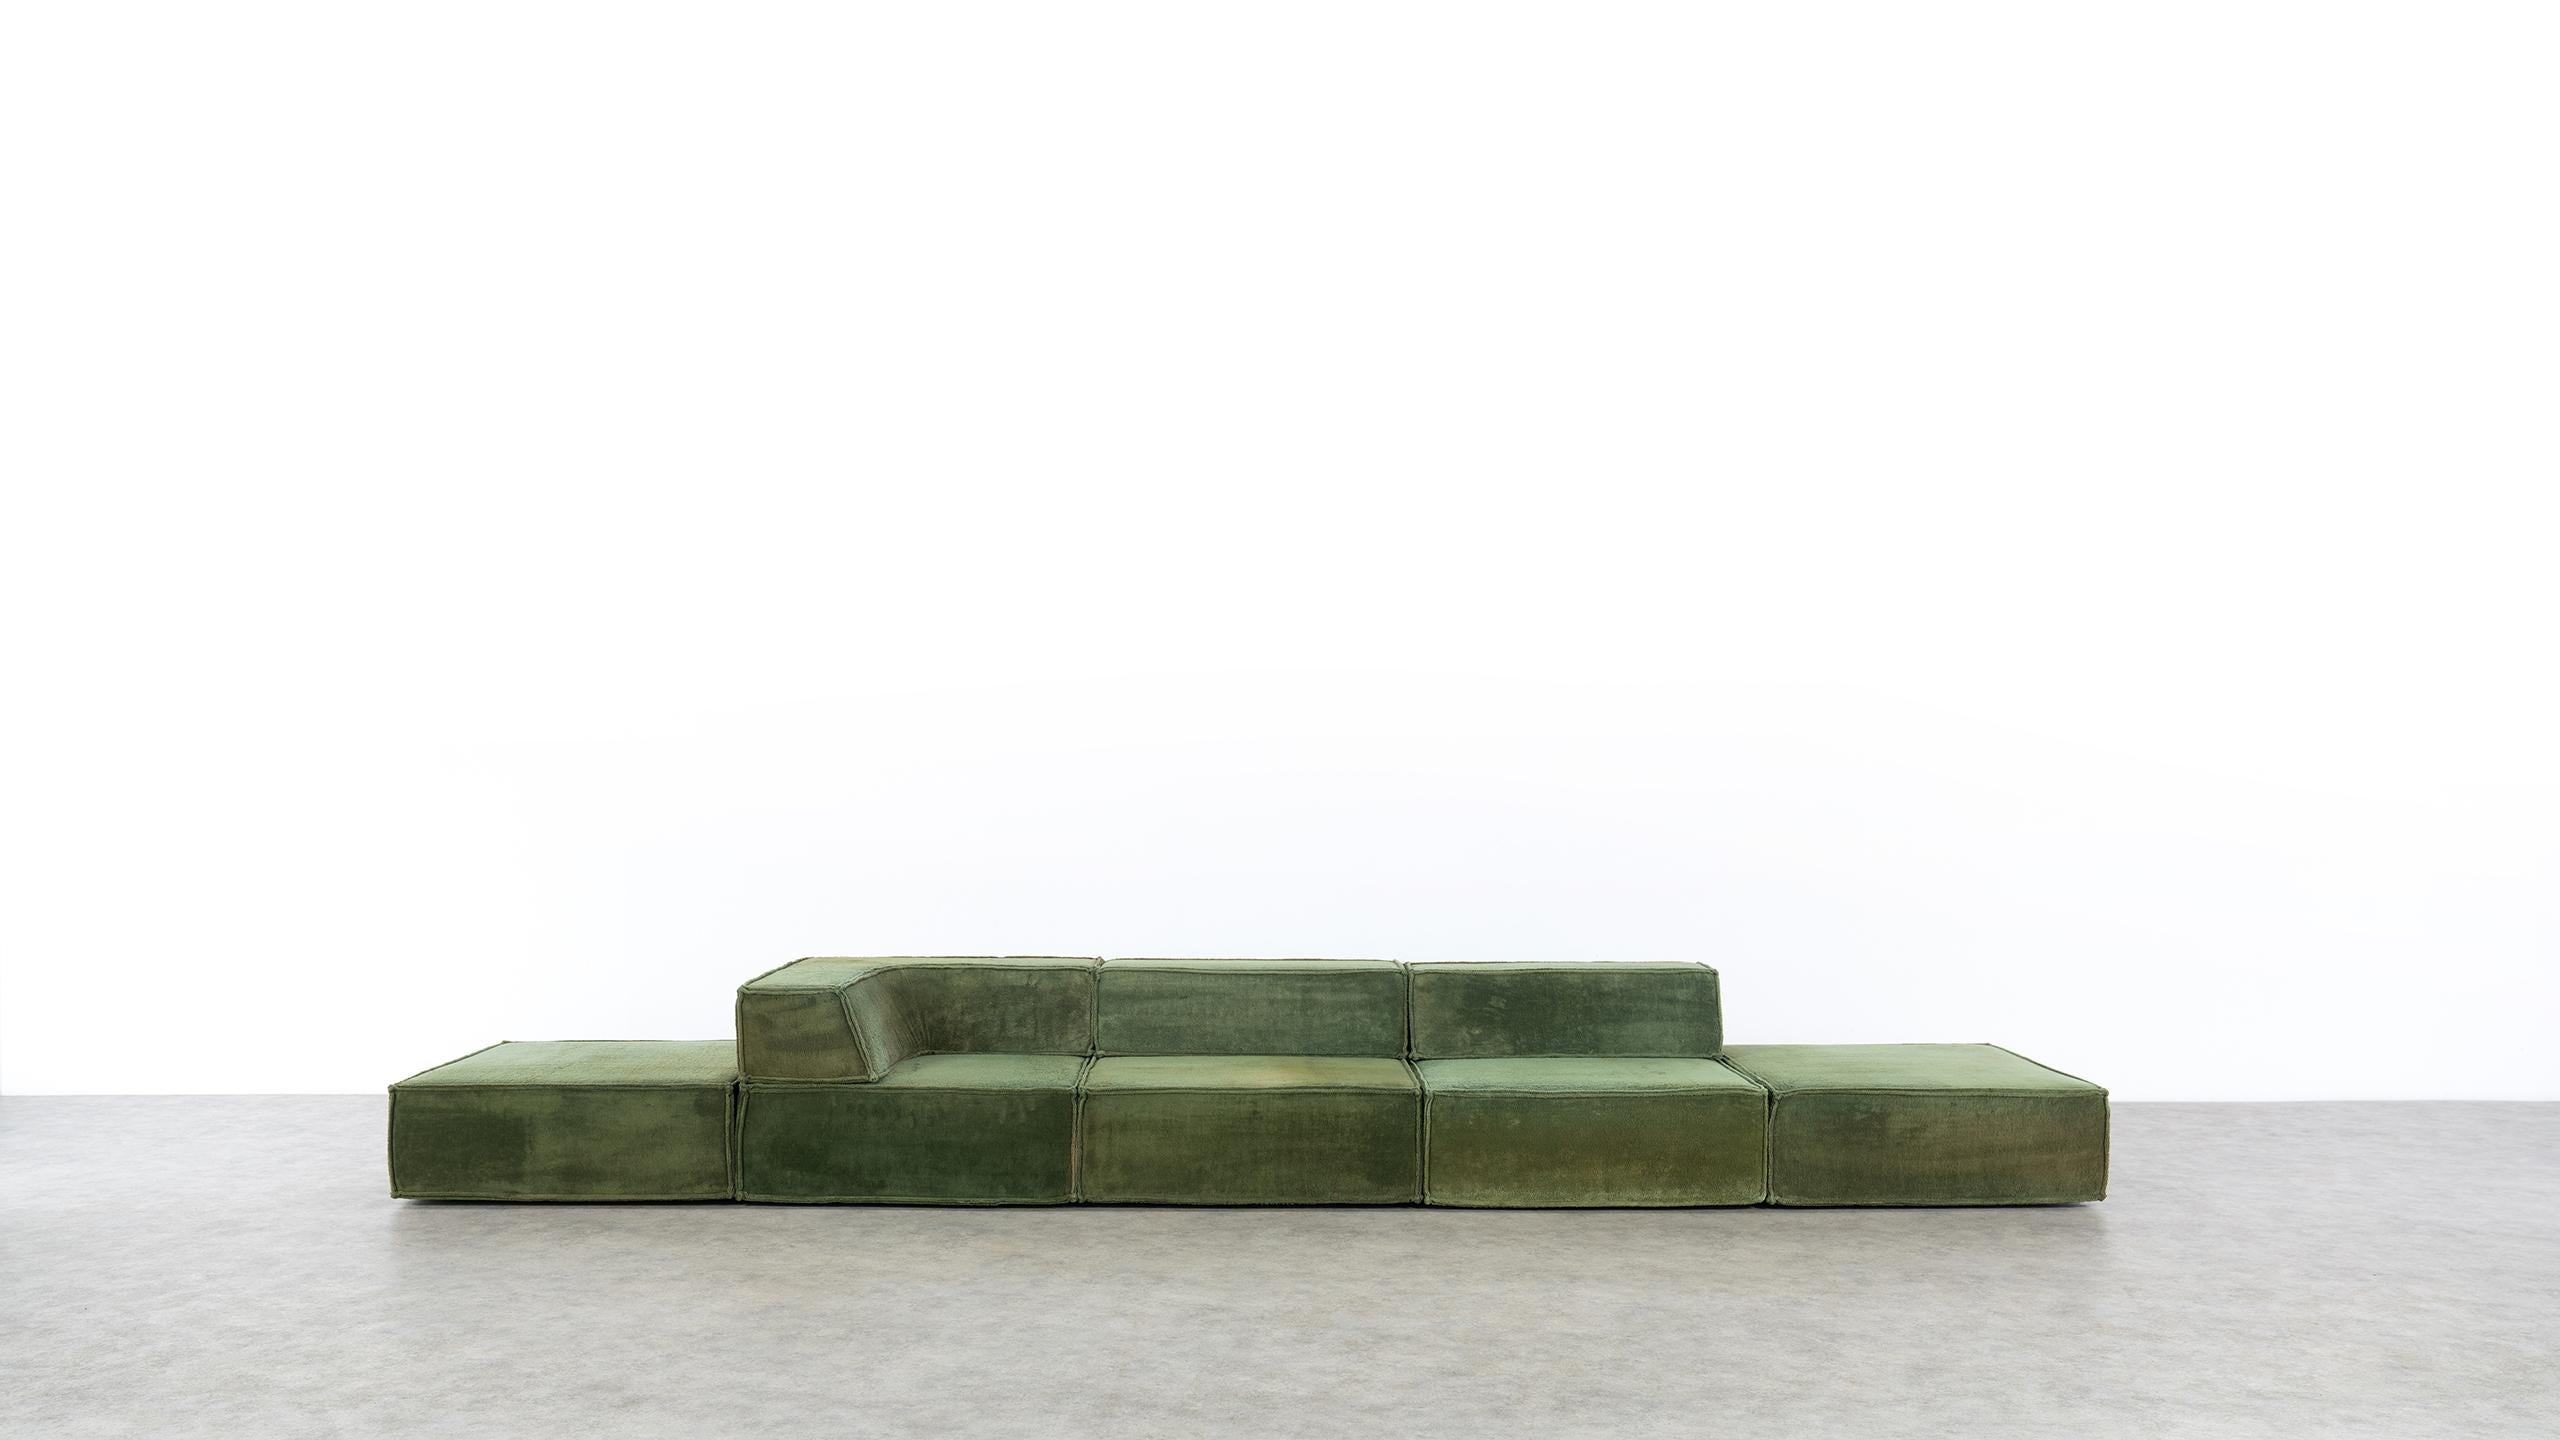 COR Trio Modular Sofa, Giant Landscape in Green, 1972 by Team Form AG, Swiss 5